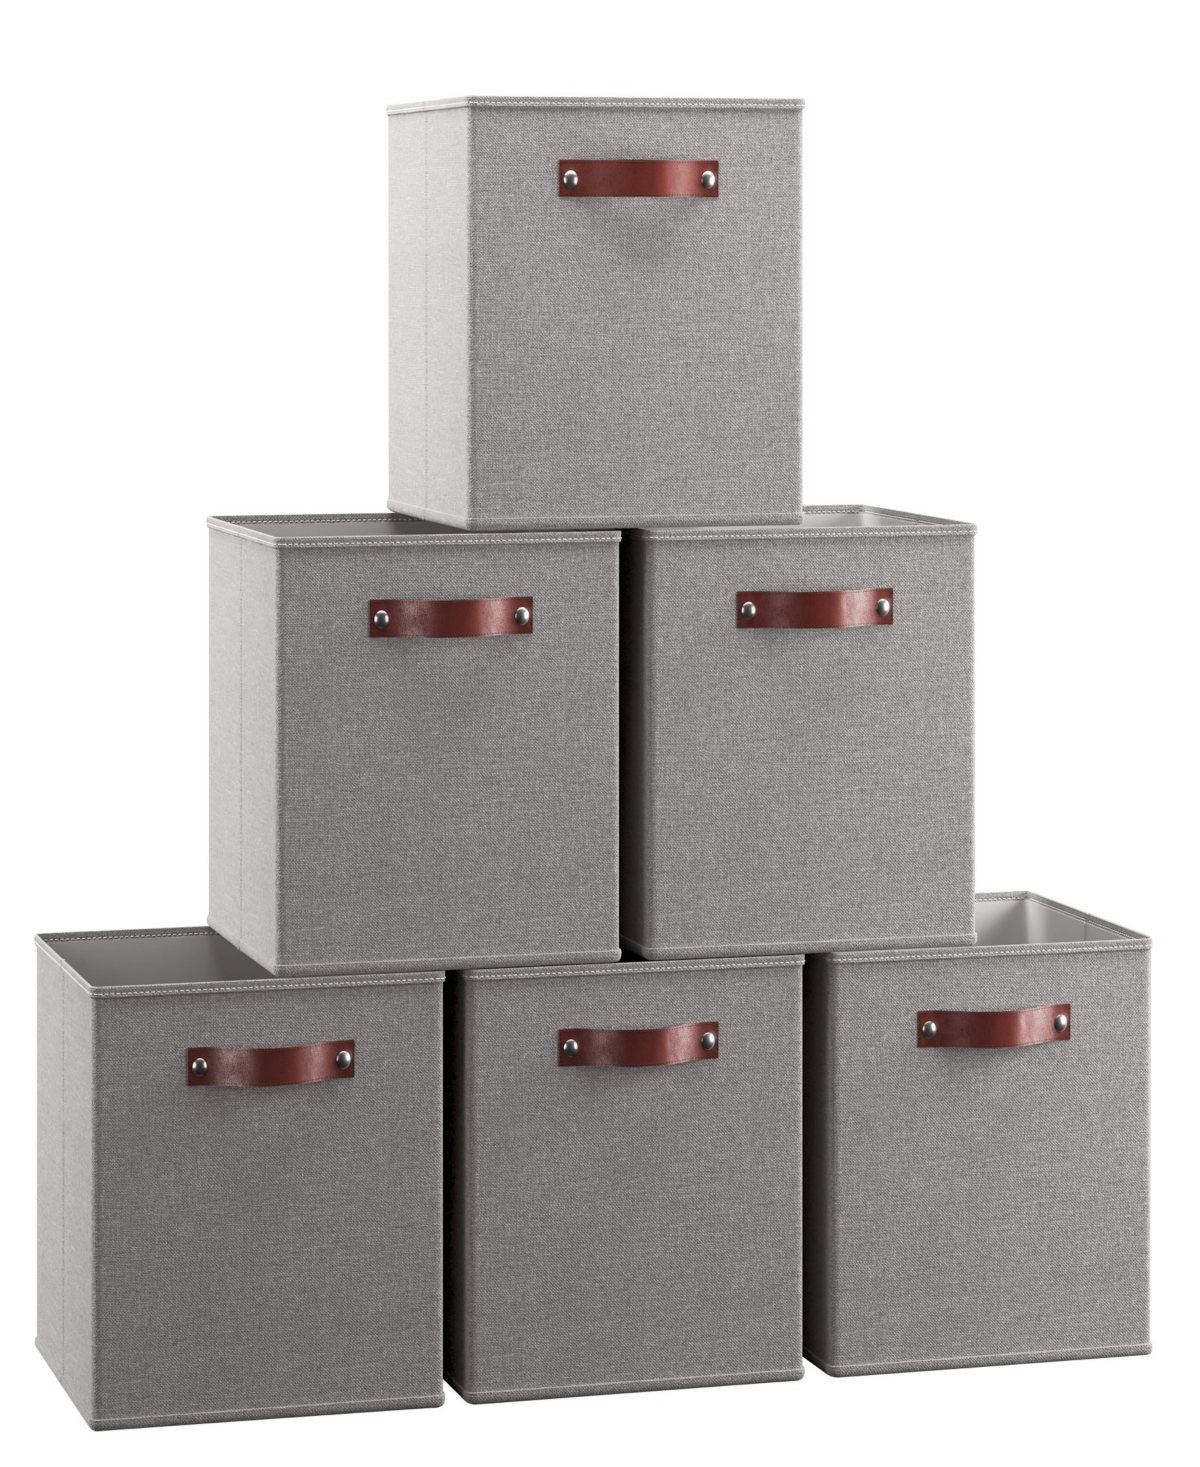 Foldable Linen Storage Cube Bin with Leather Handles - Set of 6 - Beige